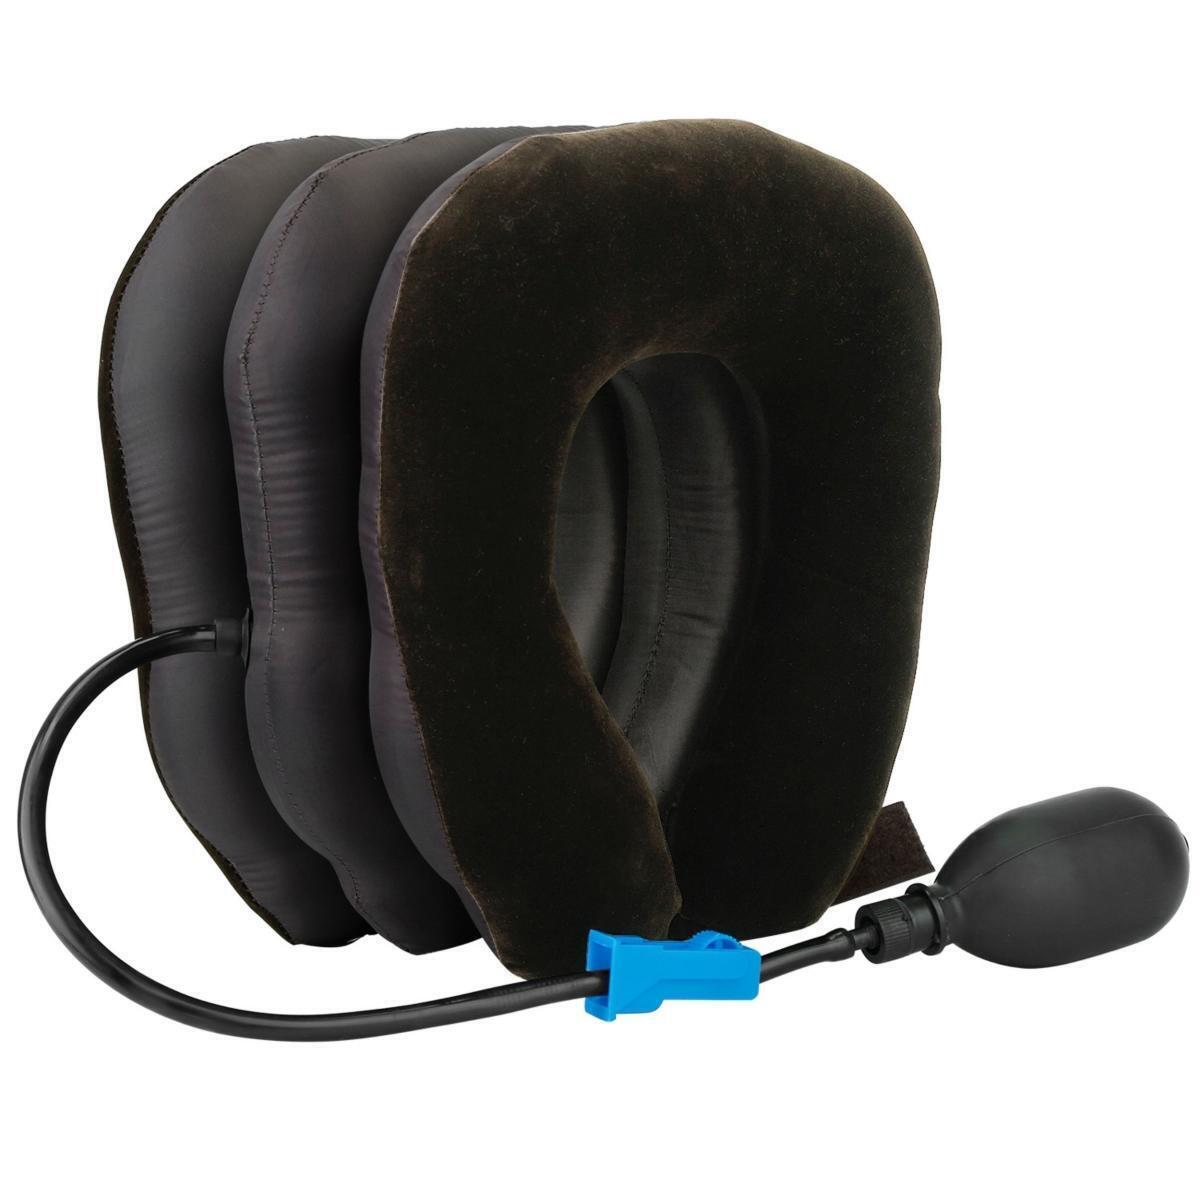 Fresh Fab Finds FFF-GPCT2411 Inflatable Neck Traction Pillow - Travel Support for Neck, Shoulder & Spine Alignment